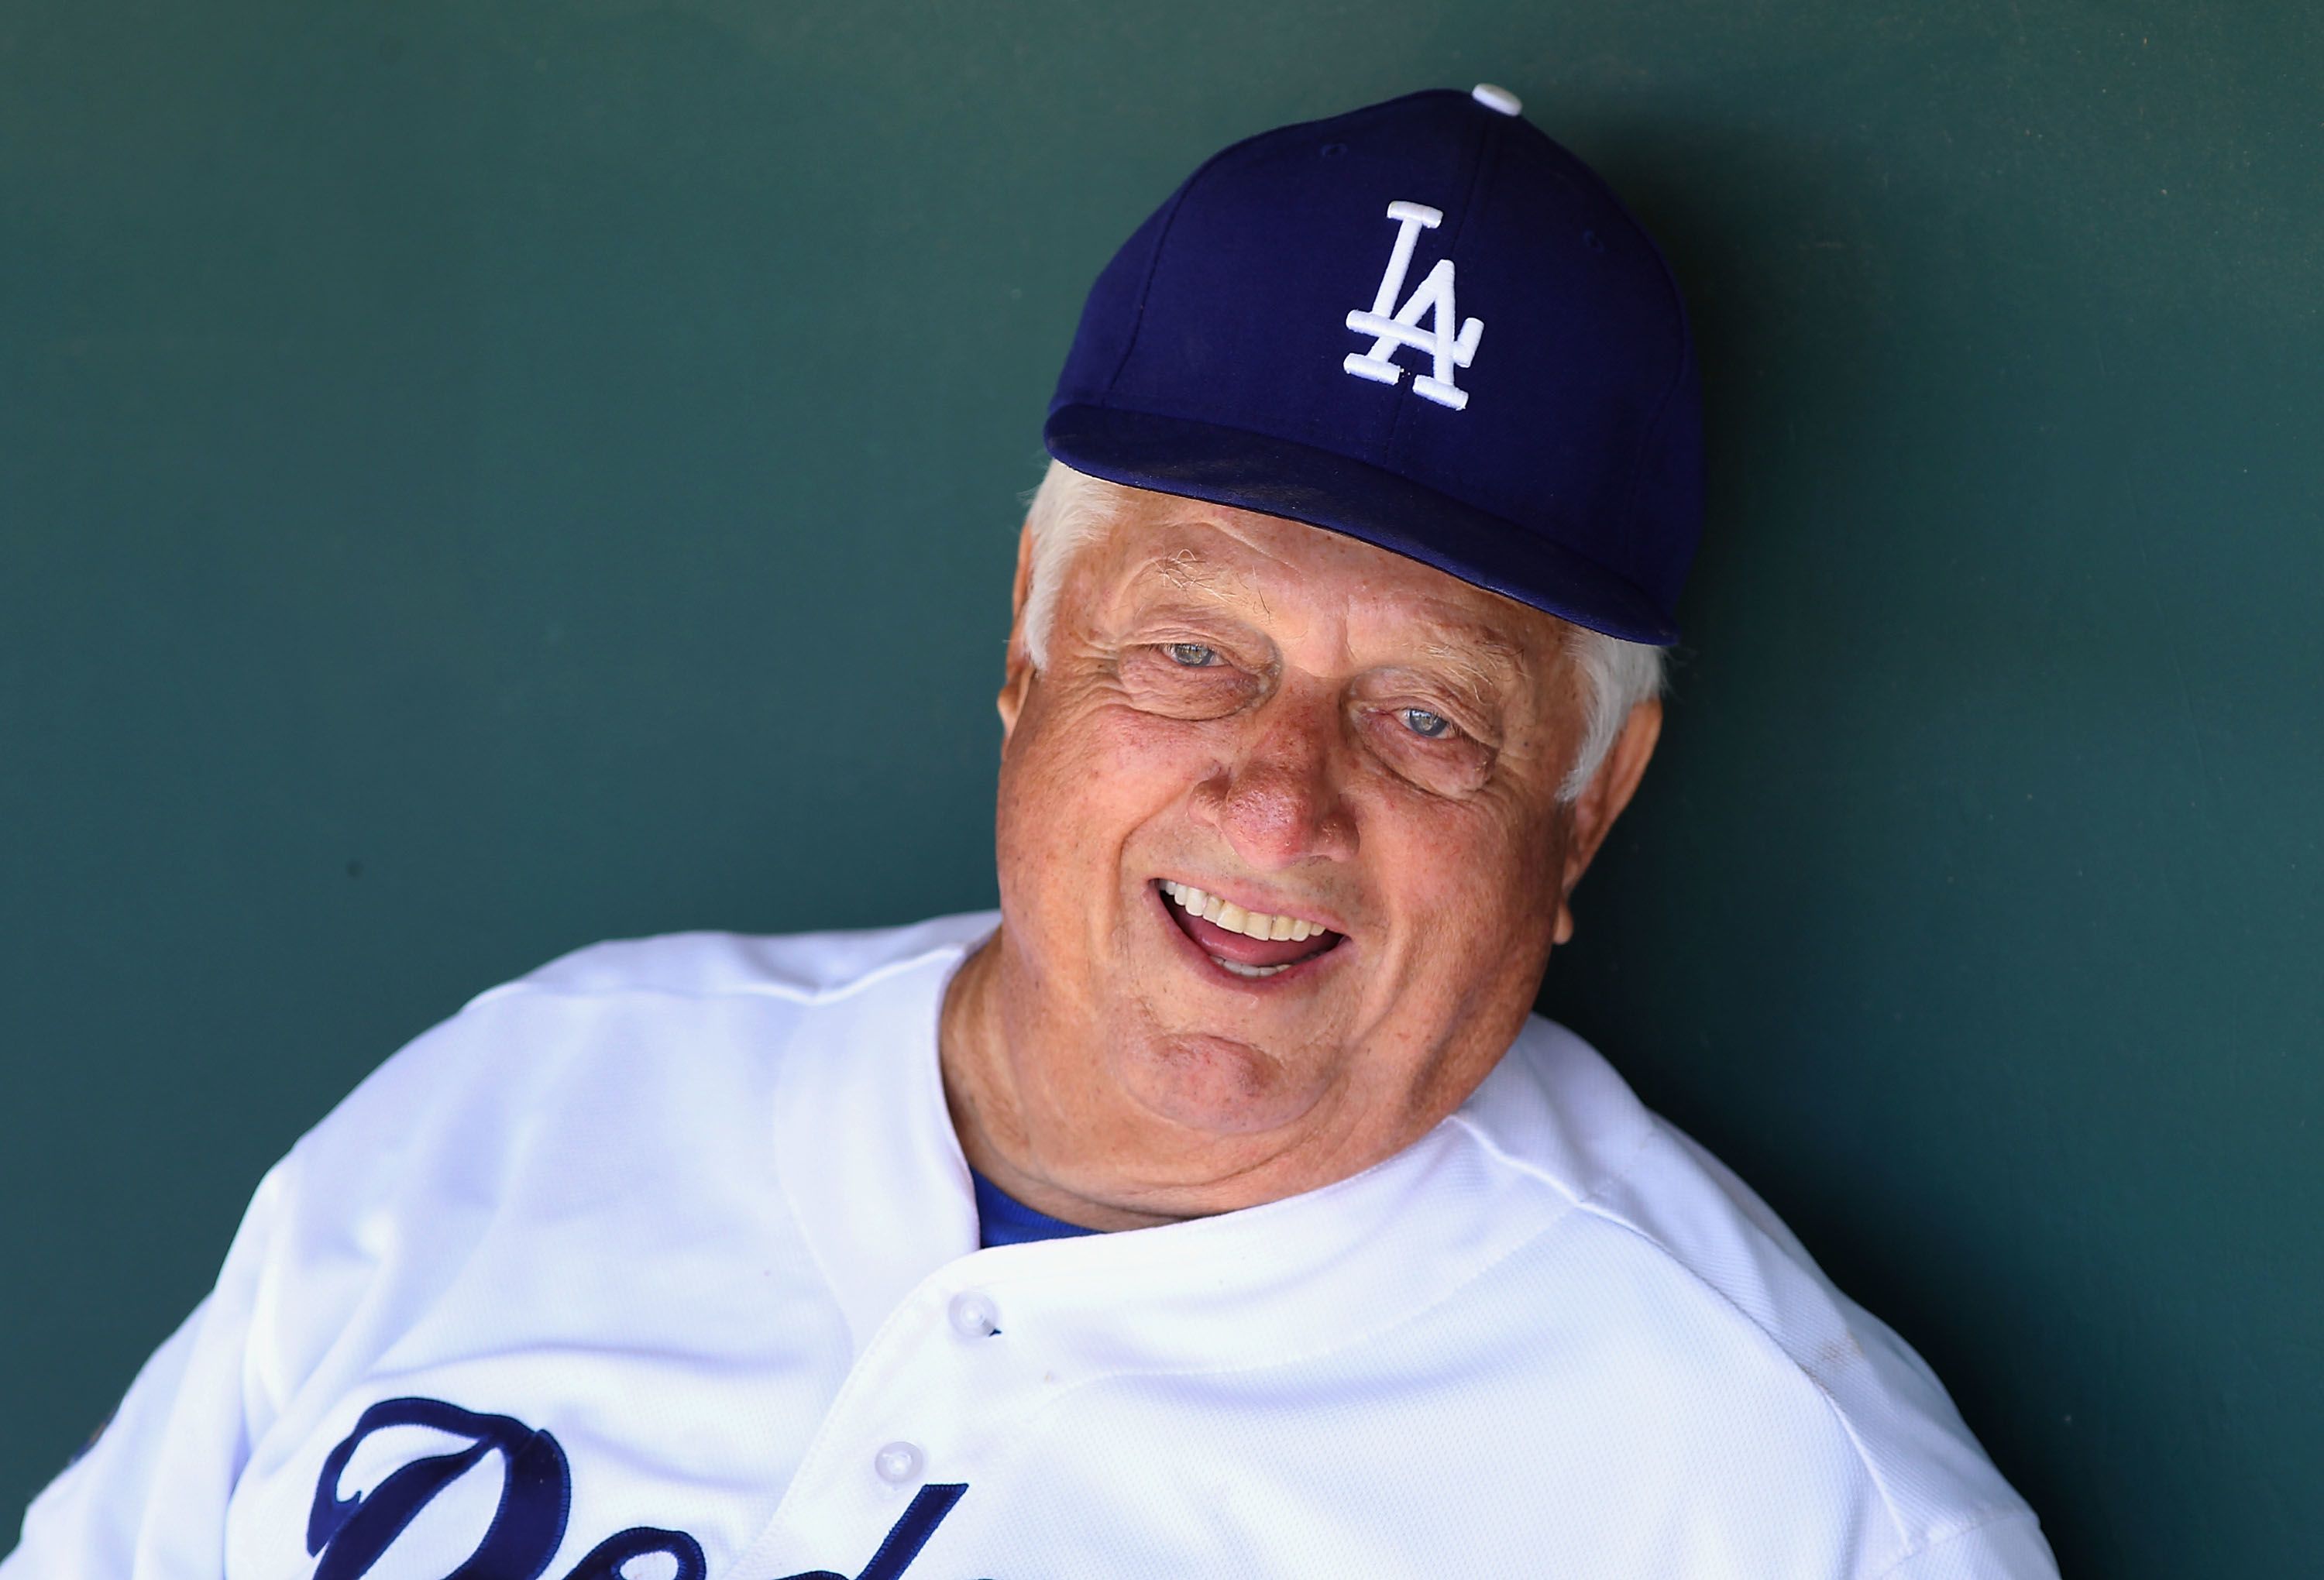 Tommy Lasorda lived as happy and full a baseball life as anyone